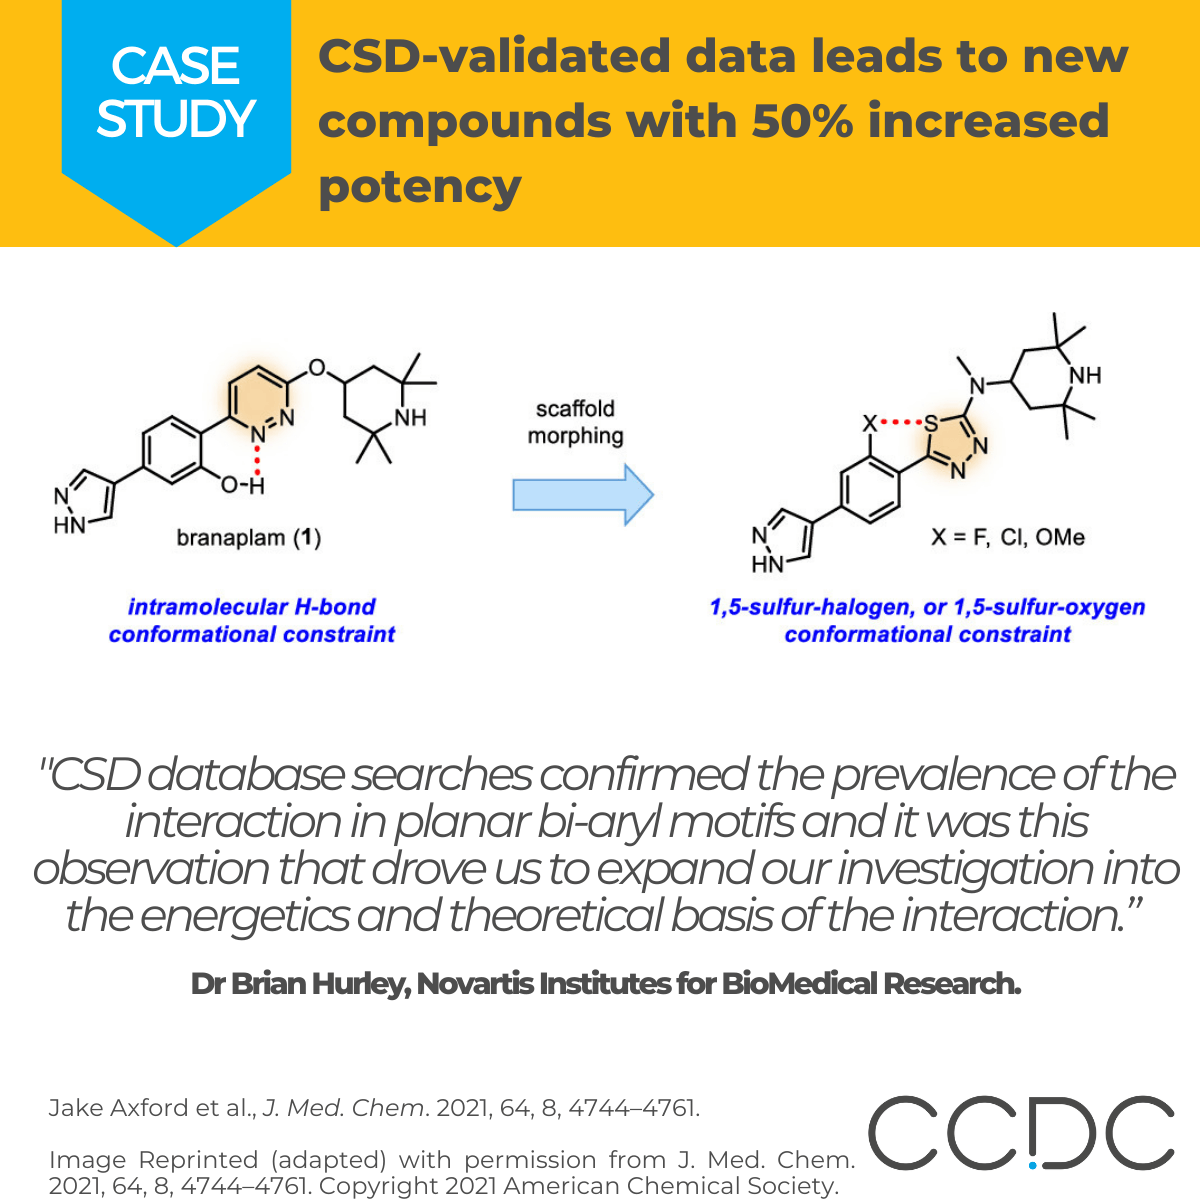 CSD case study CSD validated data discover compounds with 50% increase in potency for treatment of SMA